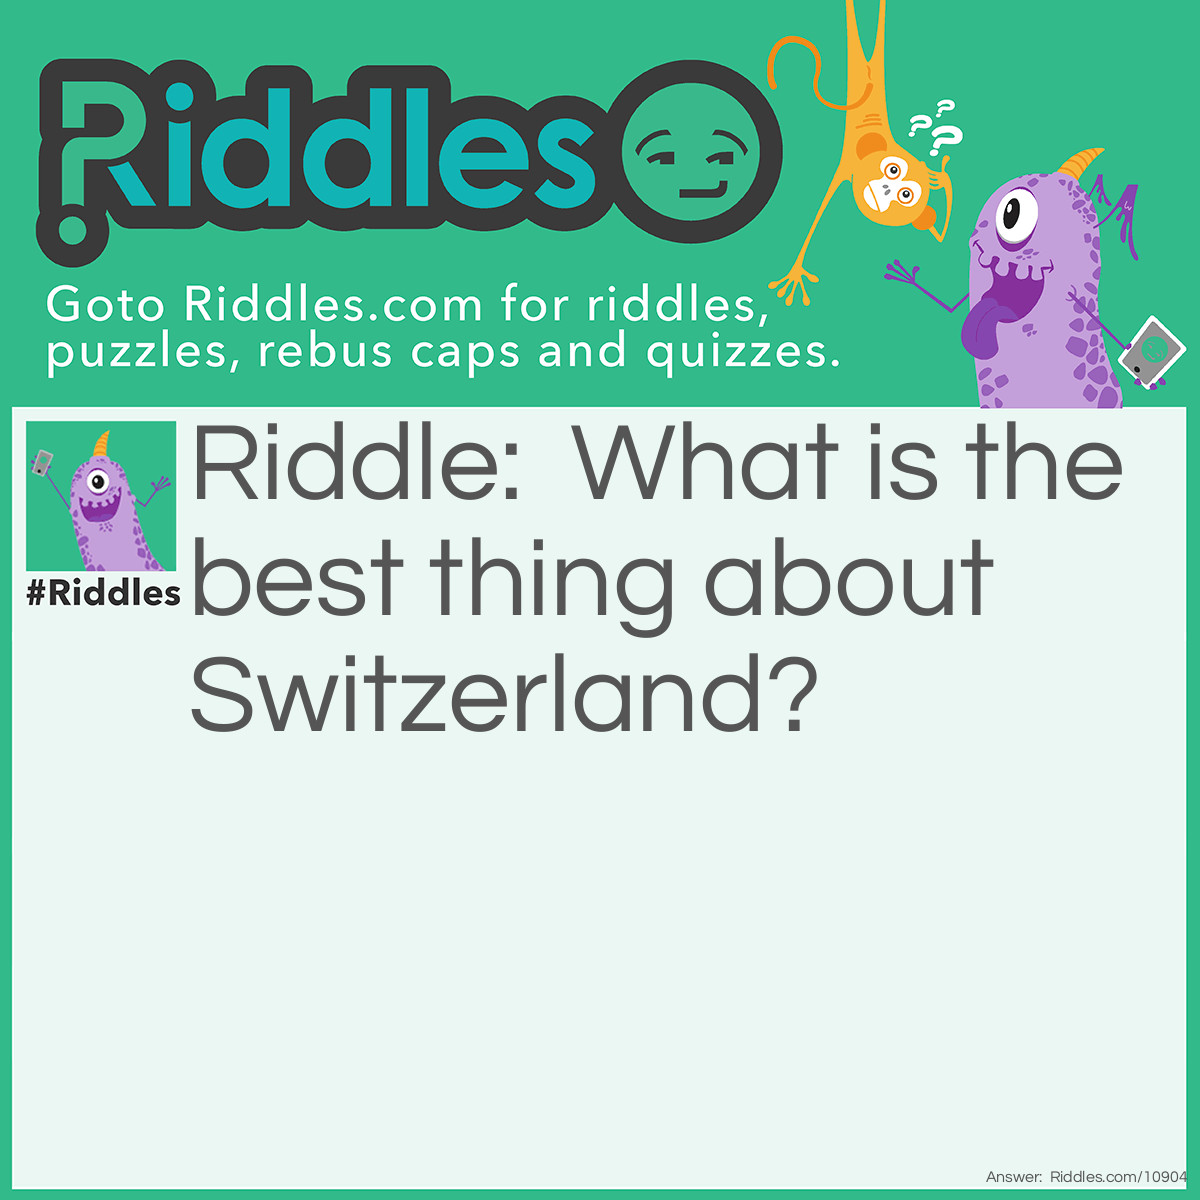 Riddle: What is the best thing about Switzerland? Answer: I dunno, but the flags a big plus.